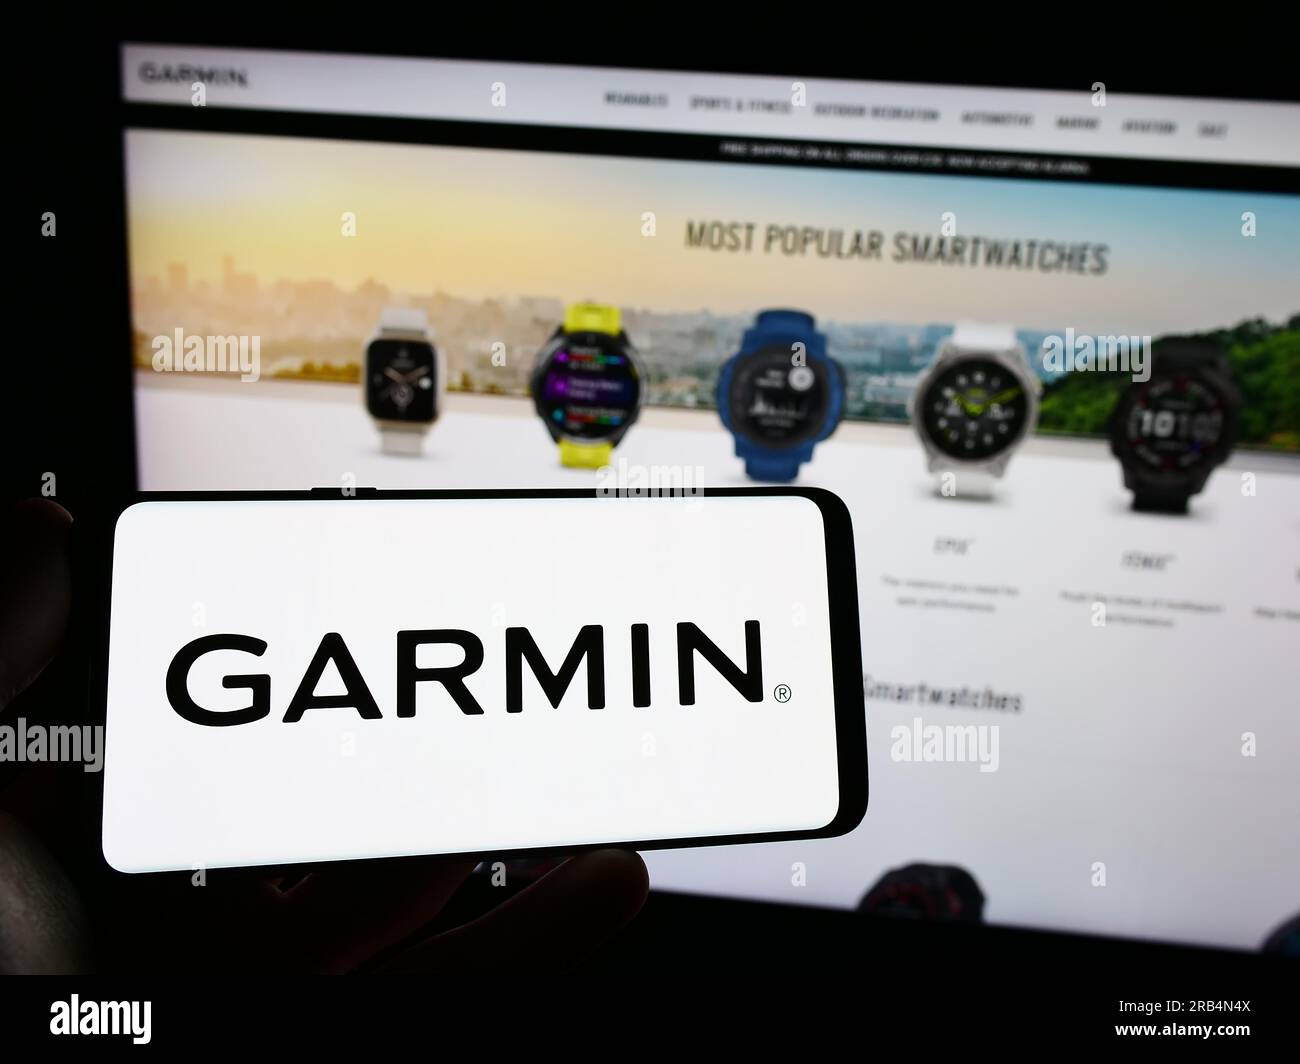 Person holding mobile phone with logo of technology company Garmin Ltd. on screen in front of business web page. Focus on phone display. Stock Photo